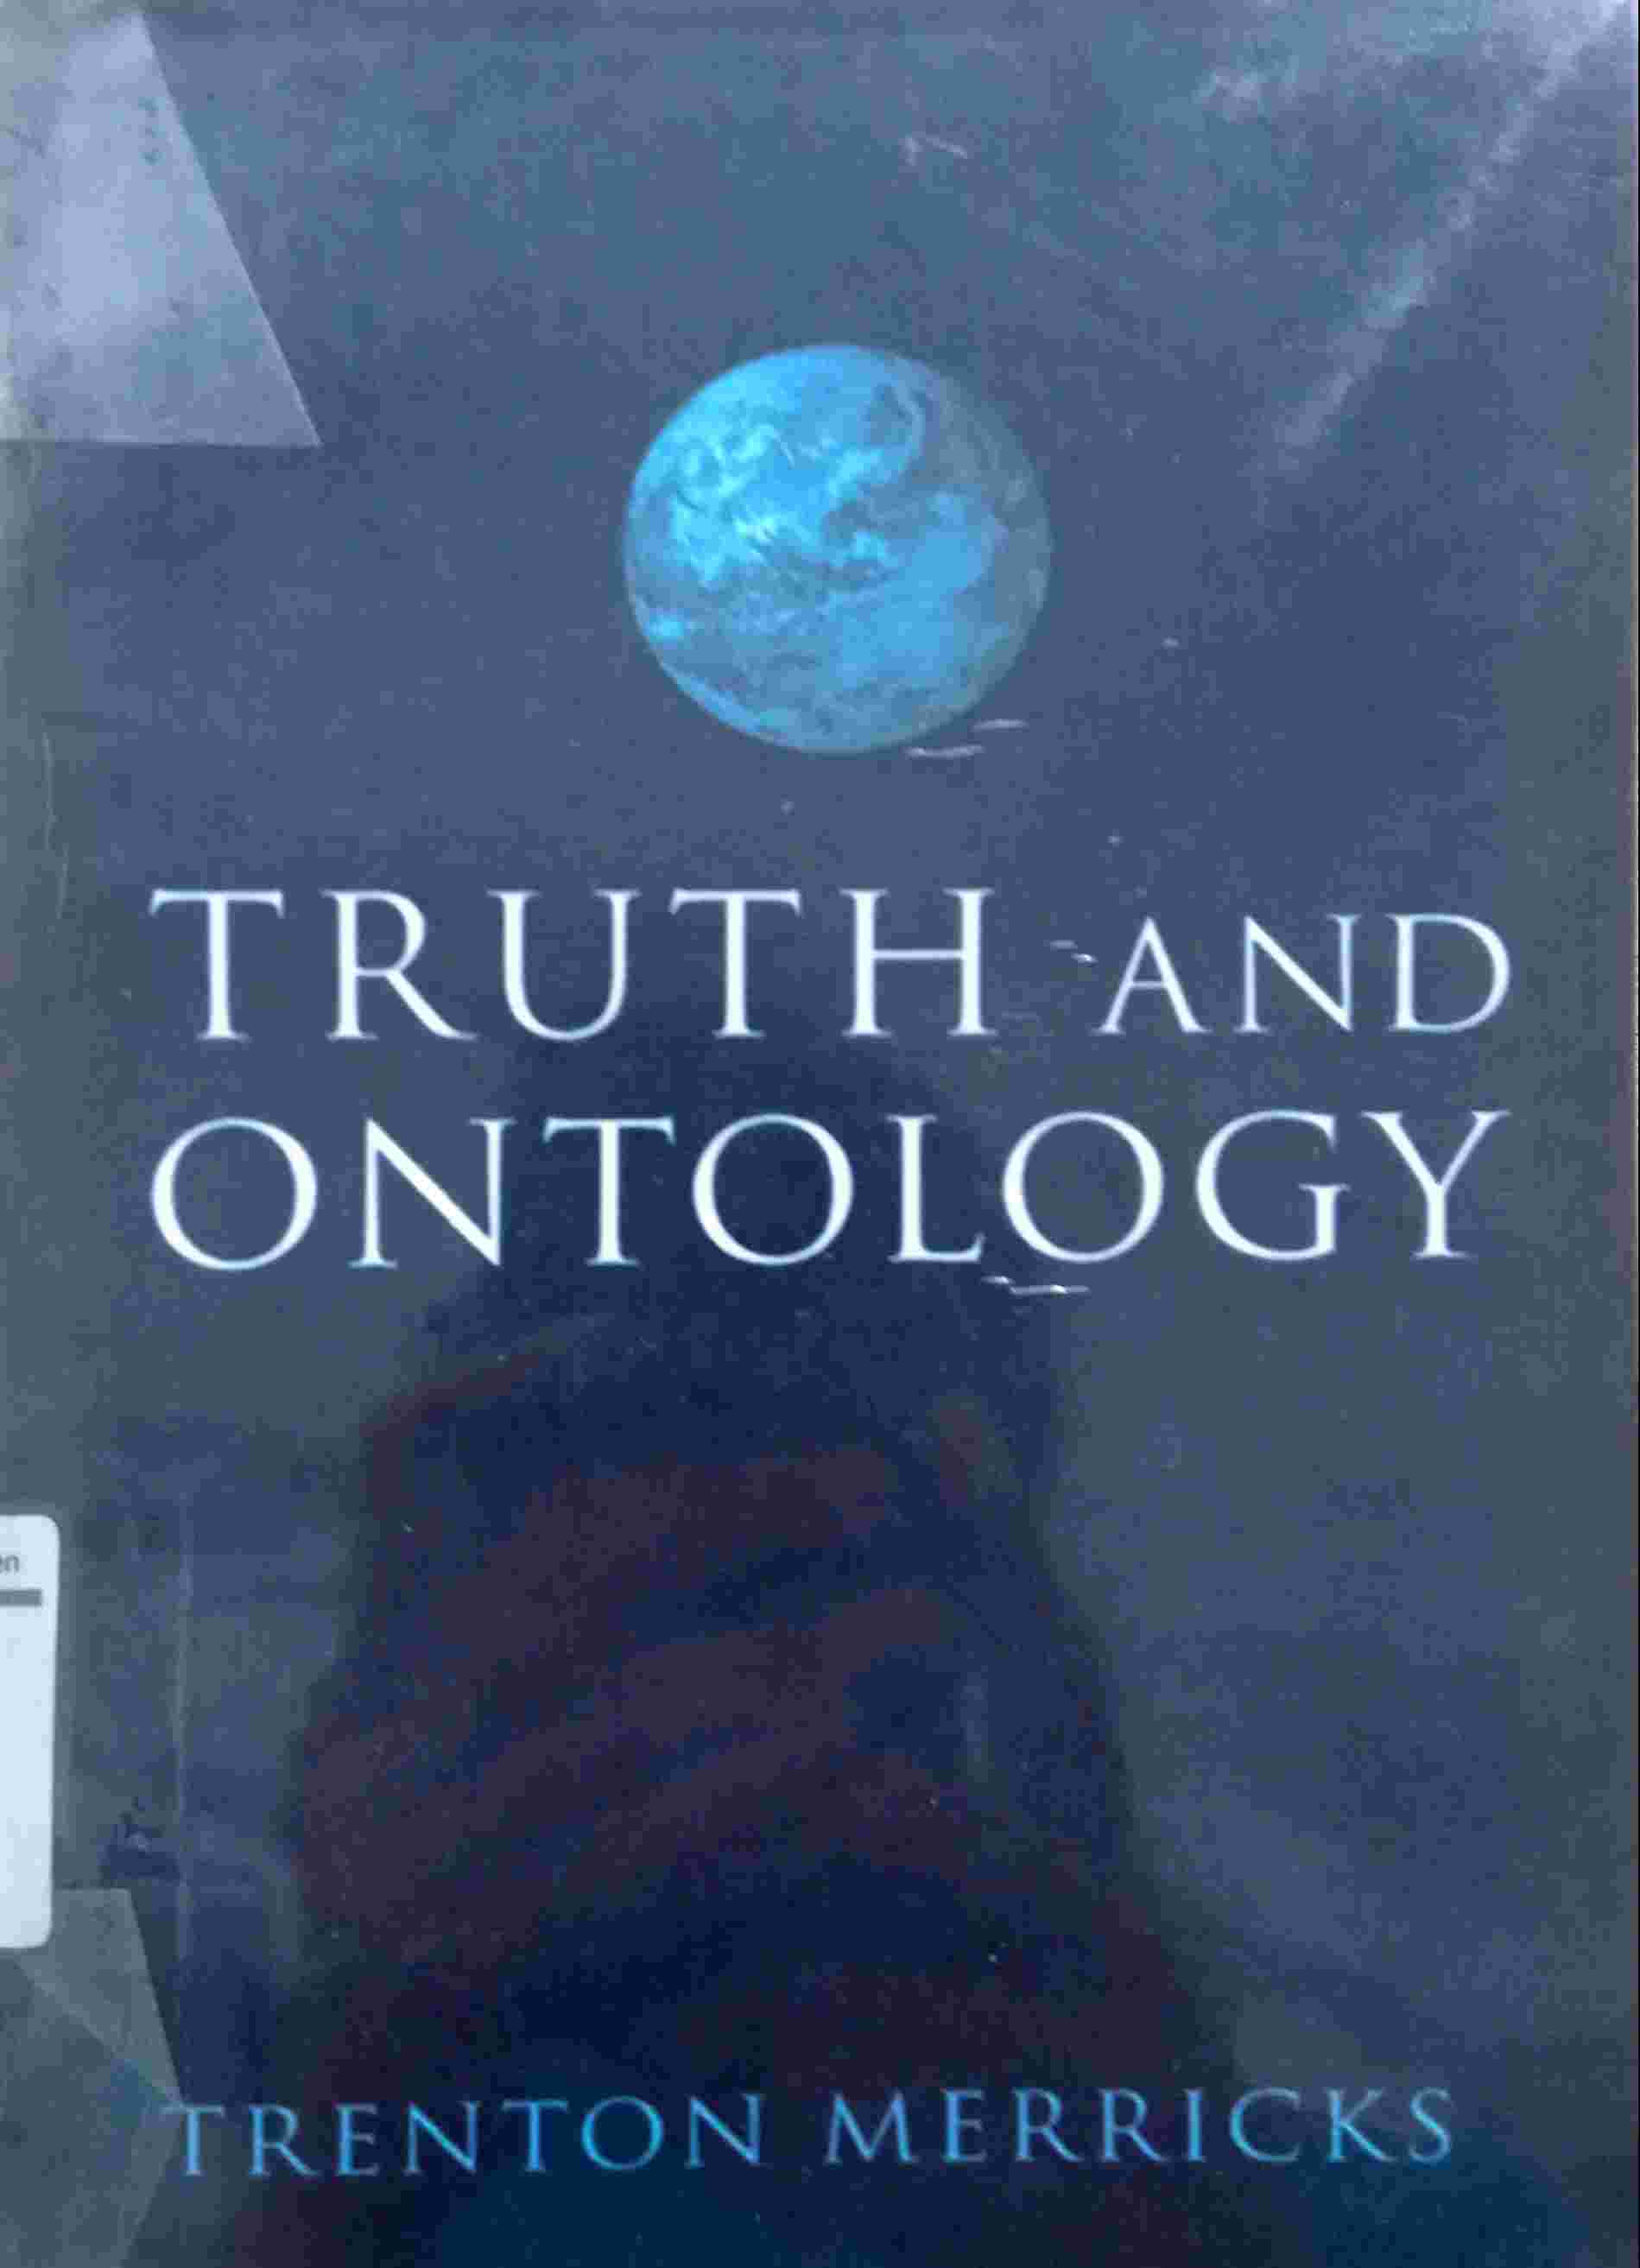 TRUTH AND ONTOLOGY